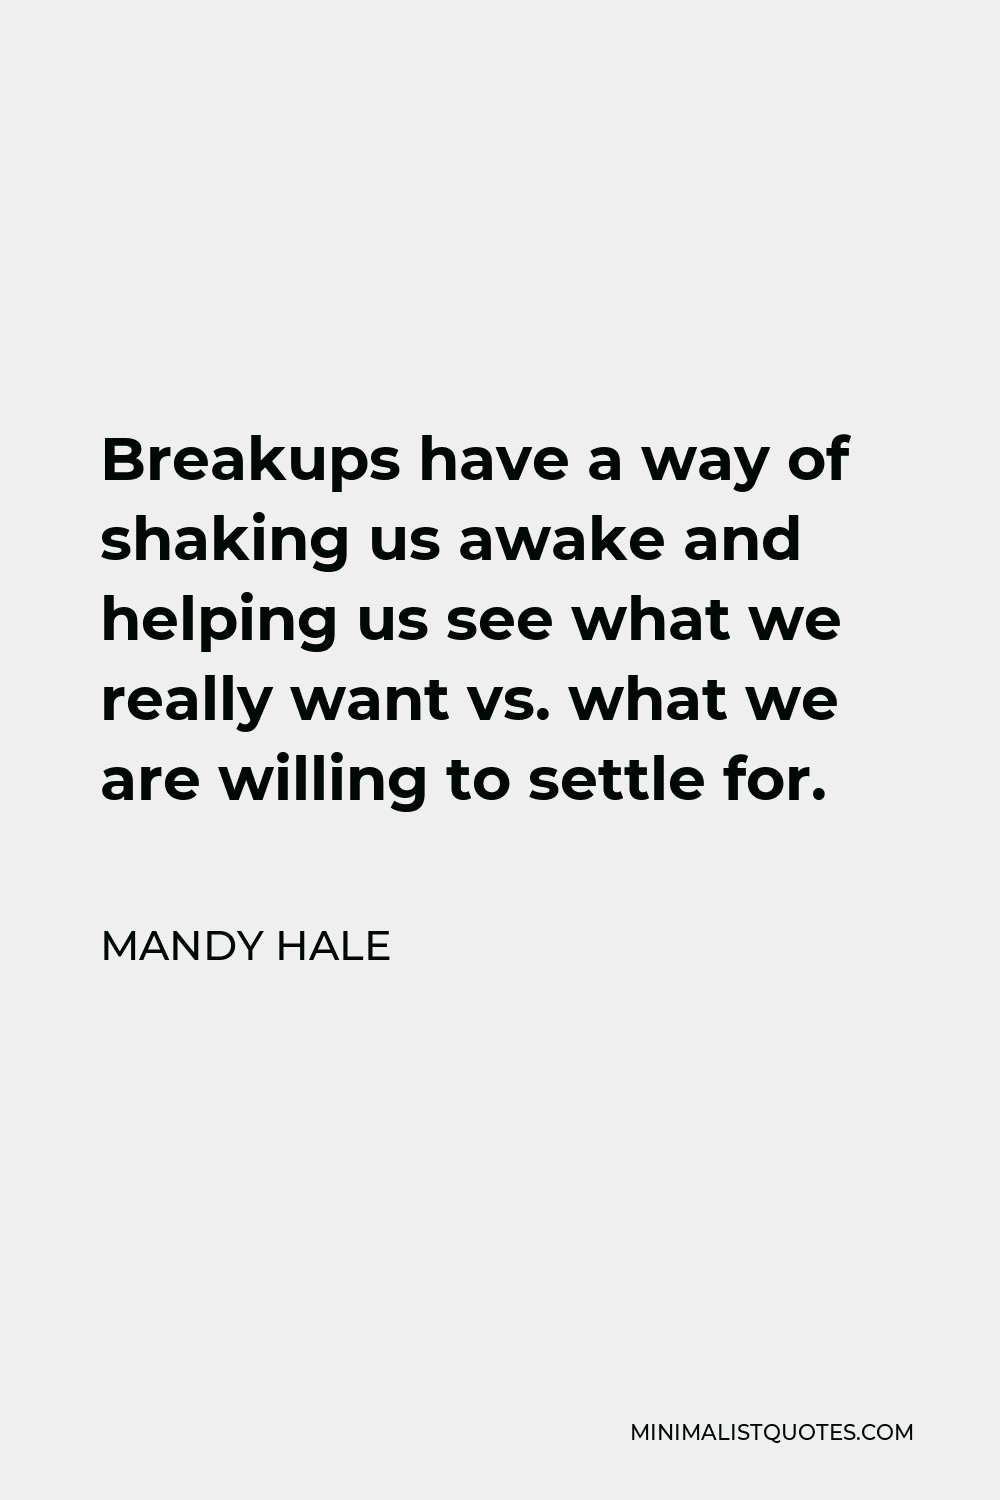 Mandy Hale Quote - Breakups have a way of shaking us awake and helping us see what we really want vs. what we are willing to settle for.